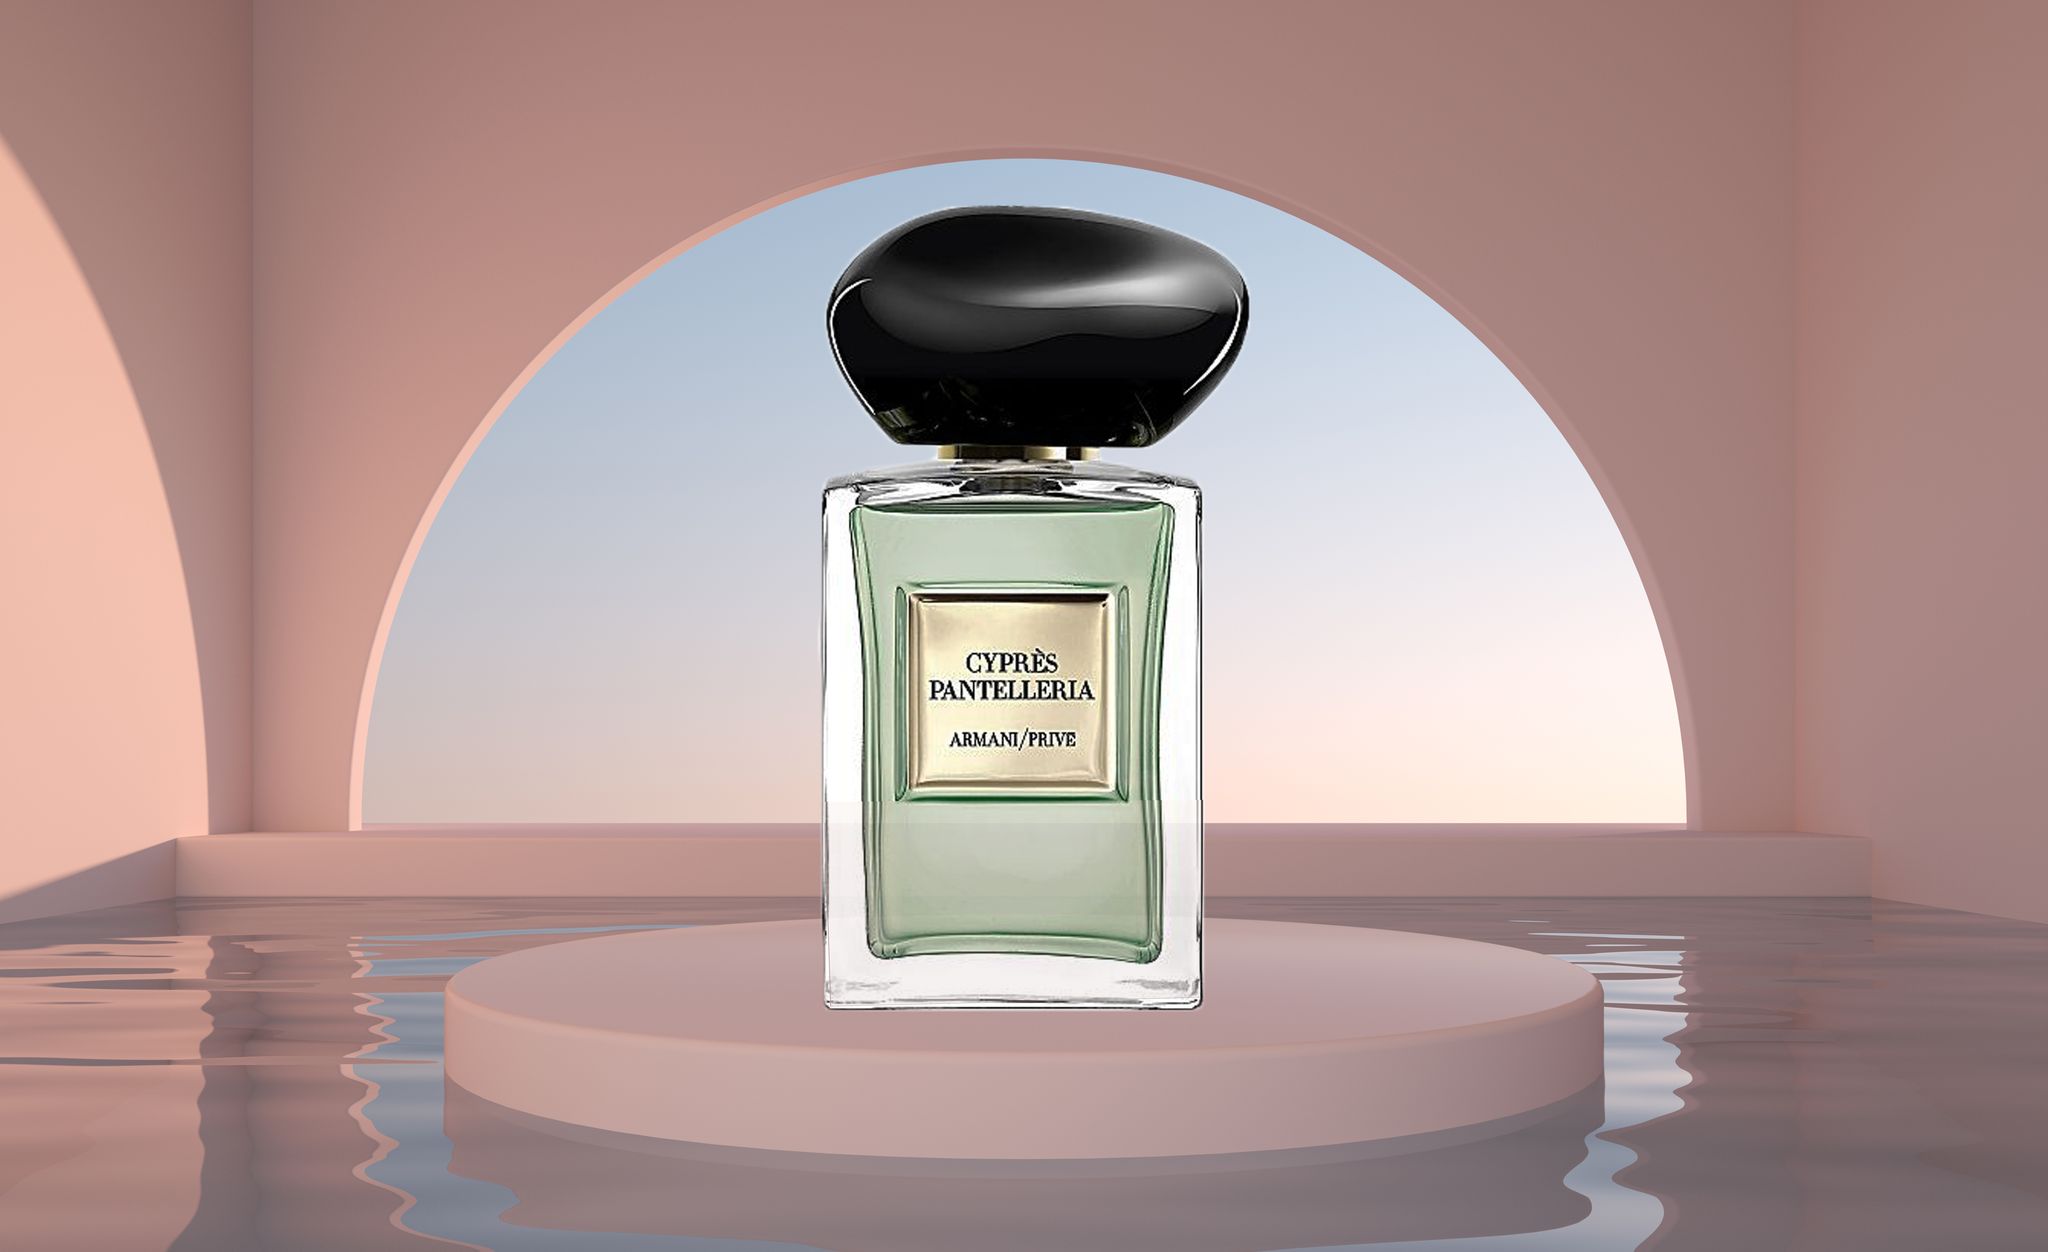 Louis Vuitton Fragrance, Gallery posted by Raquel